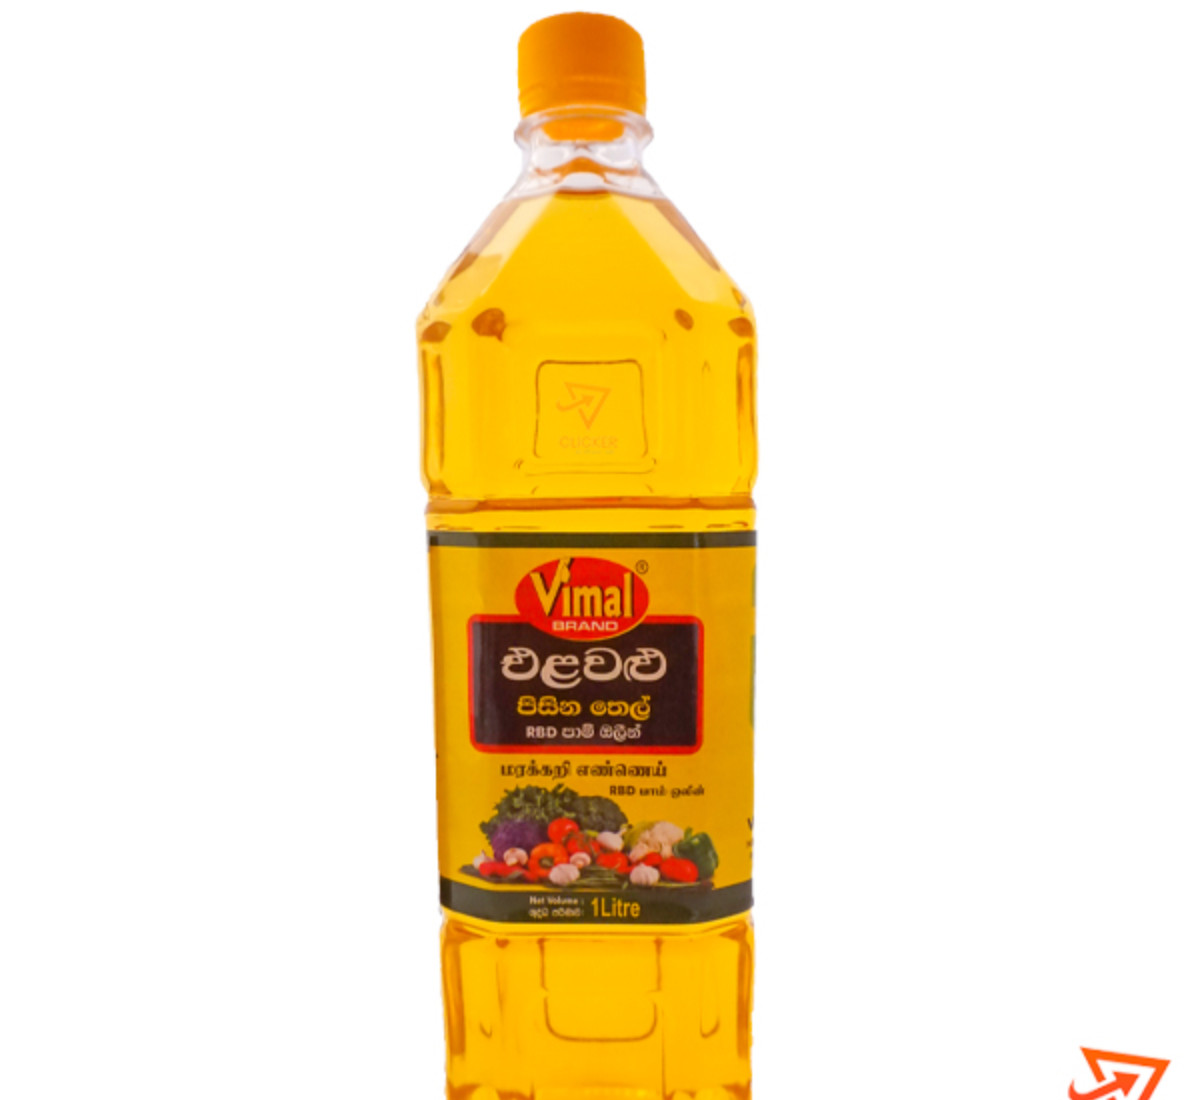 Clicker product 1L VIMAL vegetable cooking oil 868